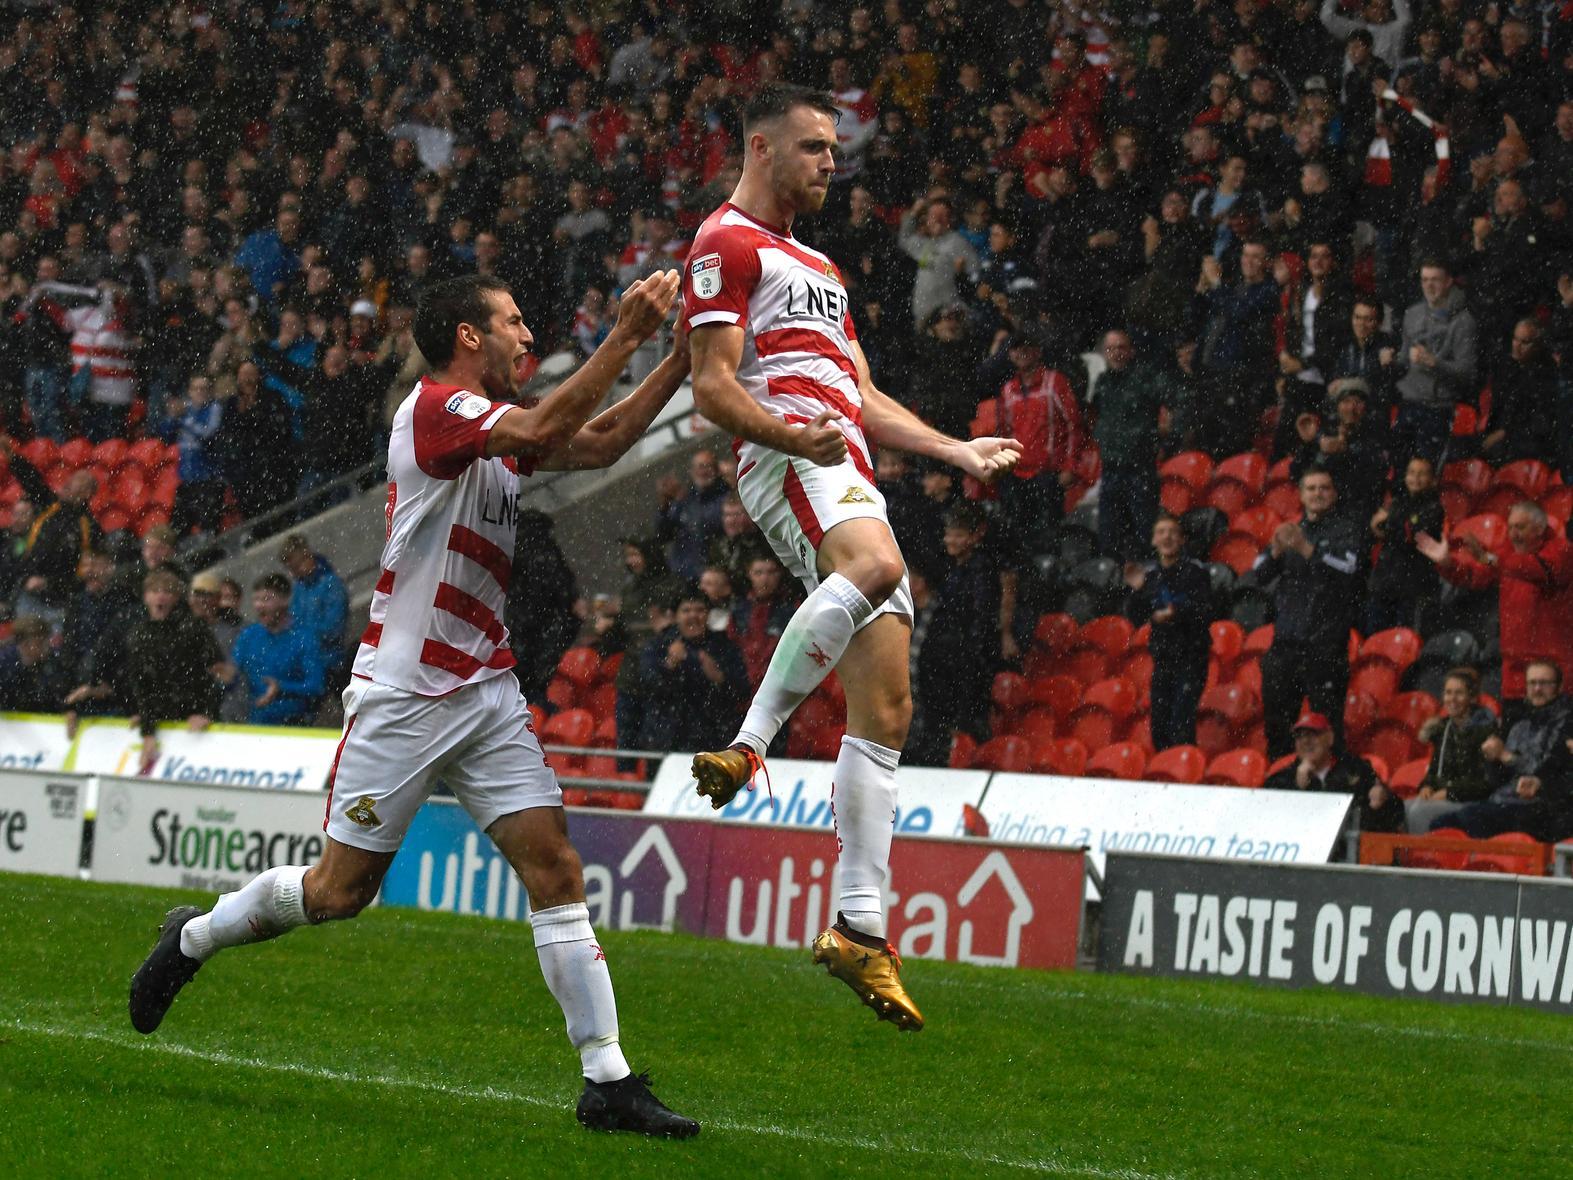 Ben Whiteman is determined to not allow transfer speculation to distract him from captaining Doncaster Rovers amidst interest from Huddersfield Town. (Doncaster Free Press)